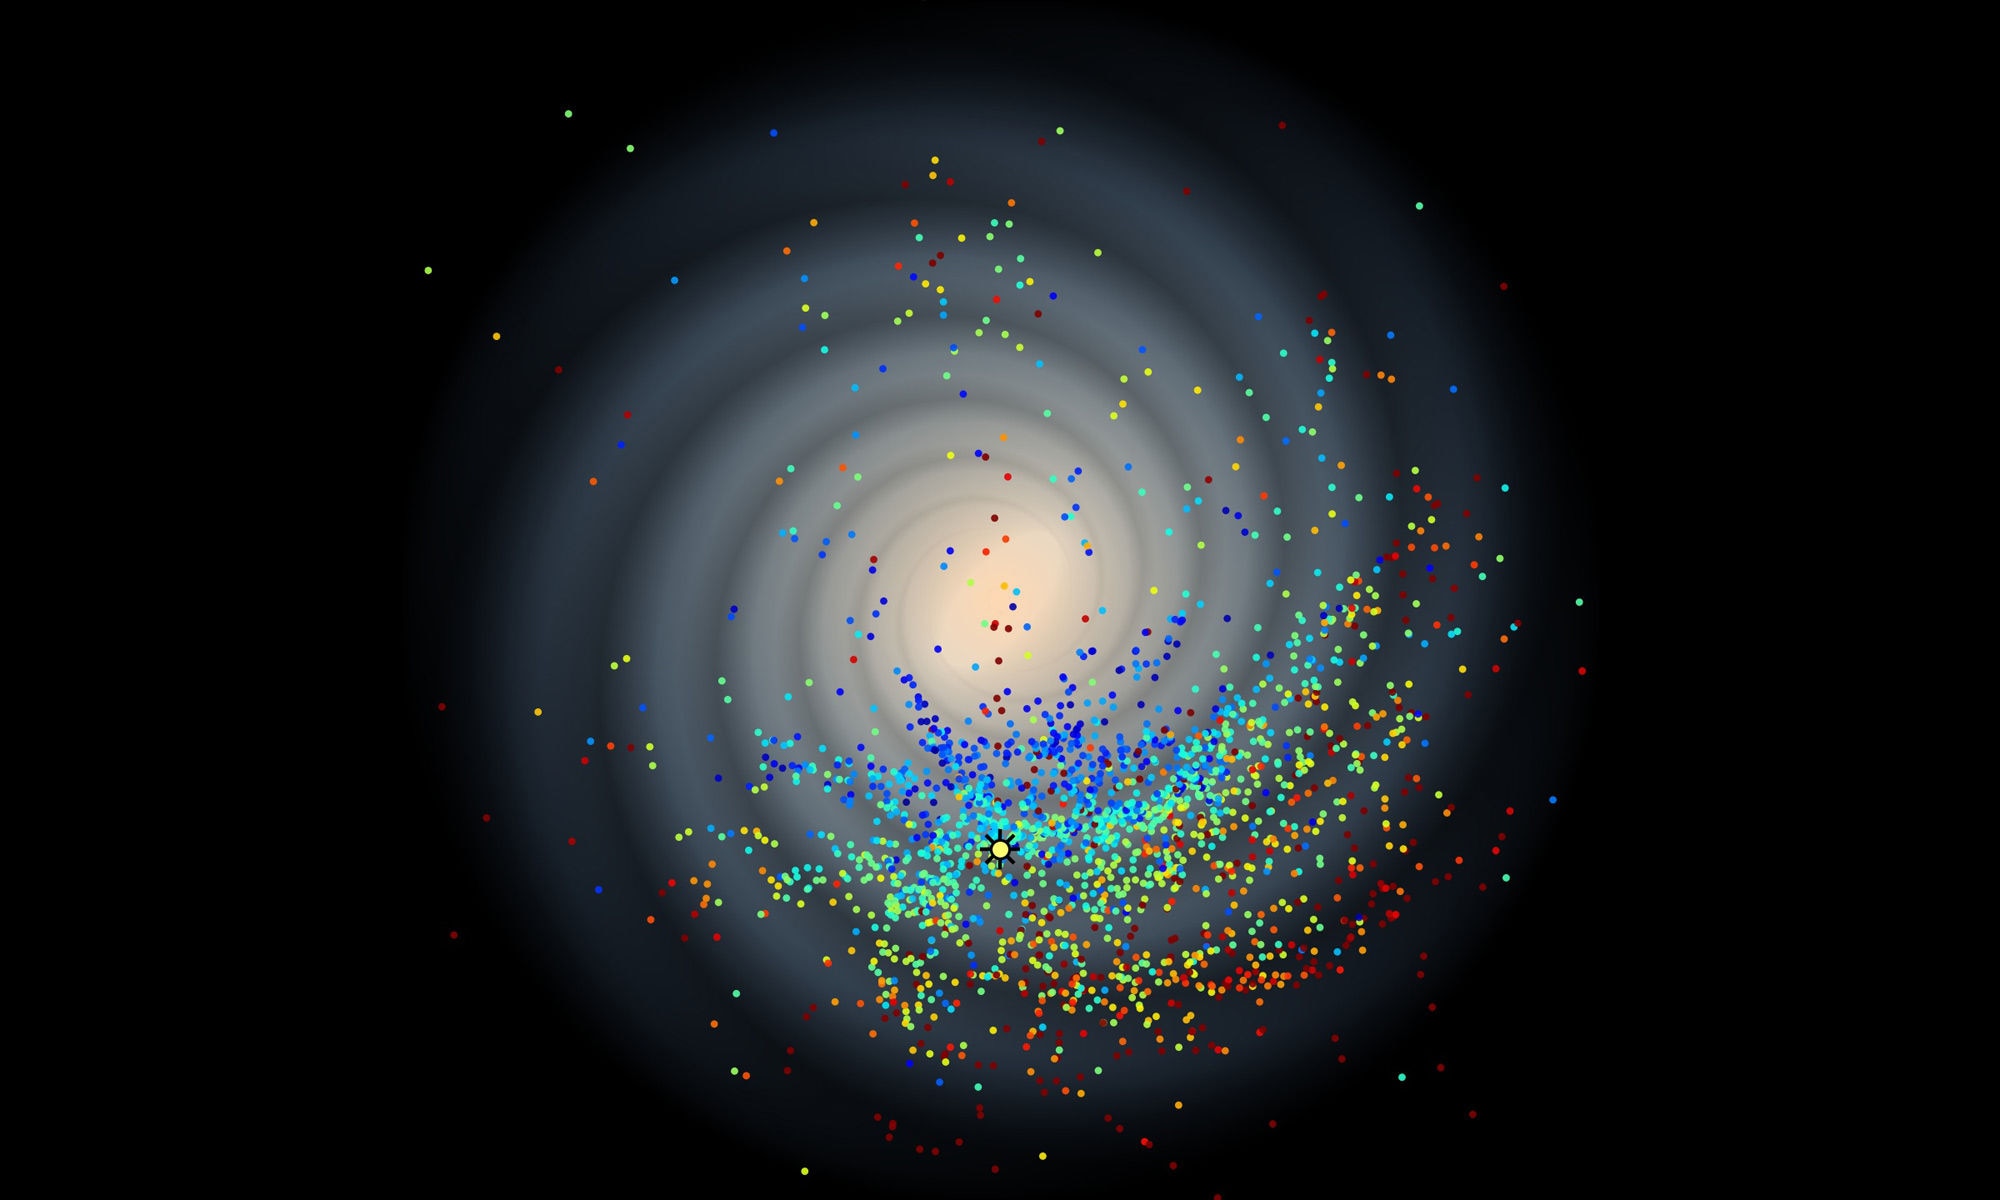 The ages of the Cepheid stars observed are mapped against a schematic of the Milky Way by color: Blue is youngest and red oldest; note how younger stars are closer to the center. The Sun’s position is marked by the yellow “sun” symbol. Credit: J. Skowron 